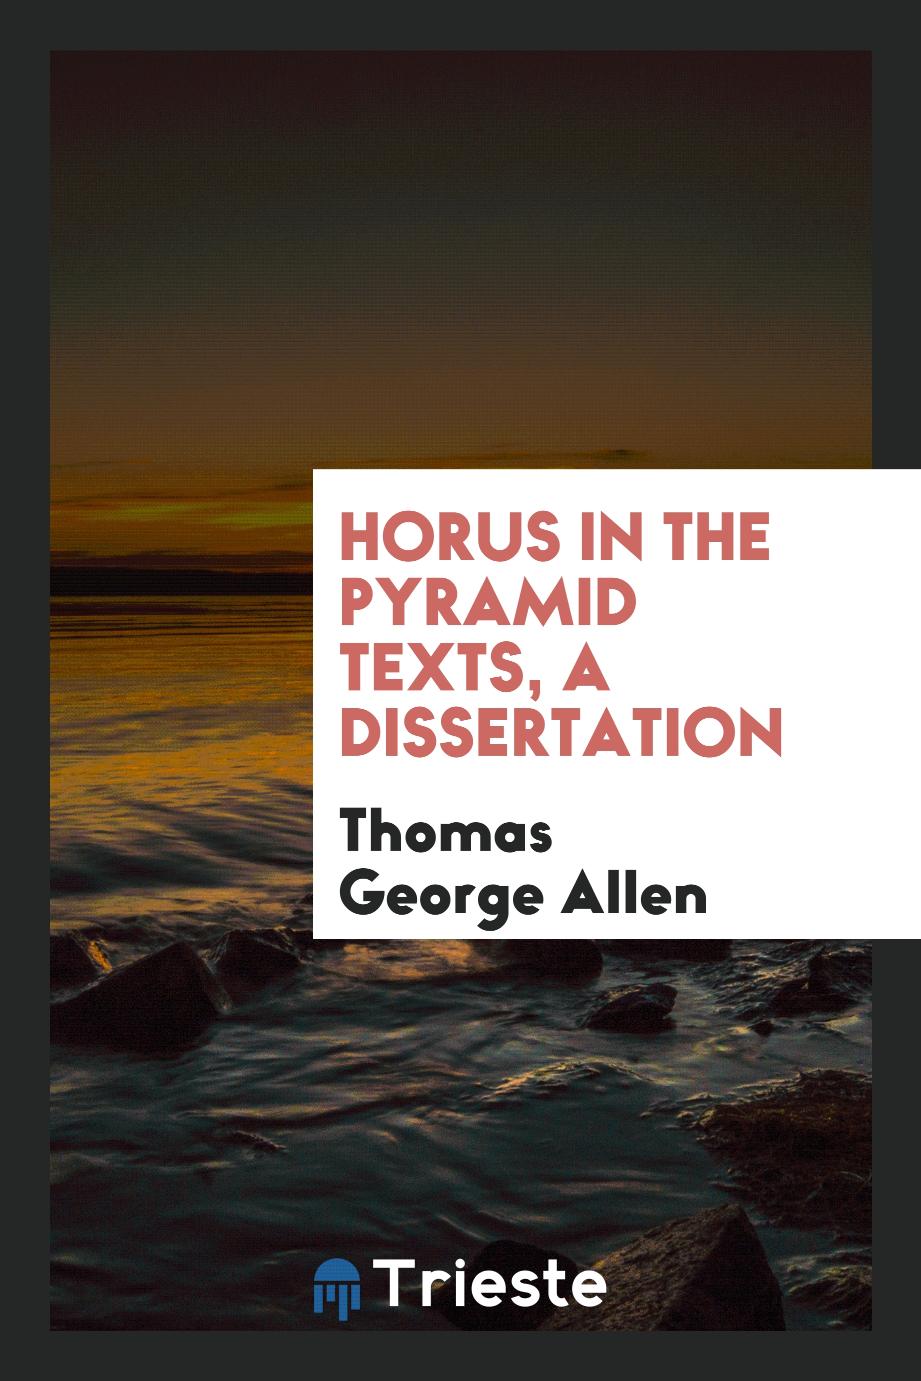 Horus in the Pyramid Texts, a dissertation